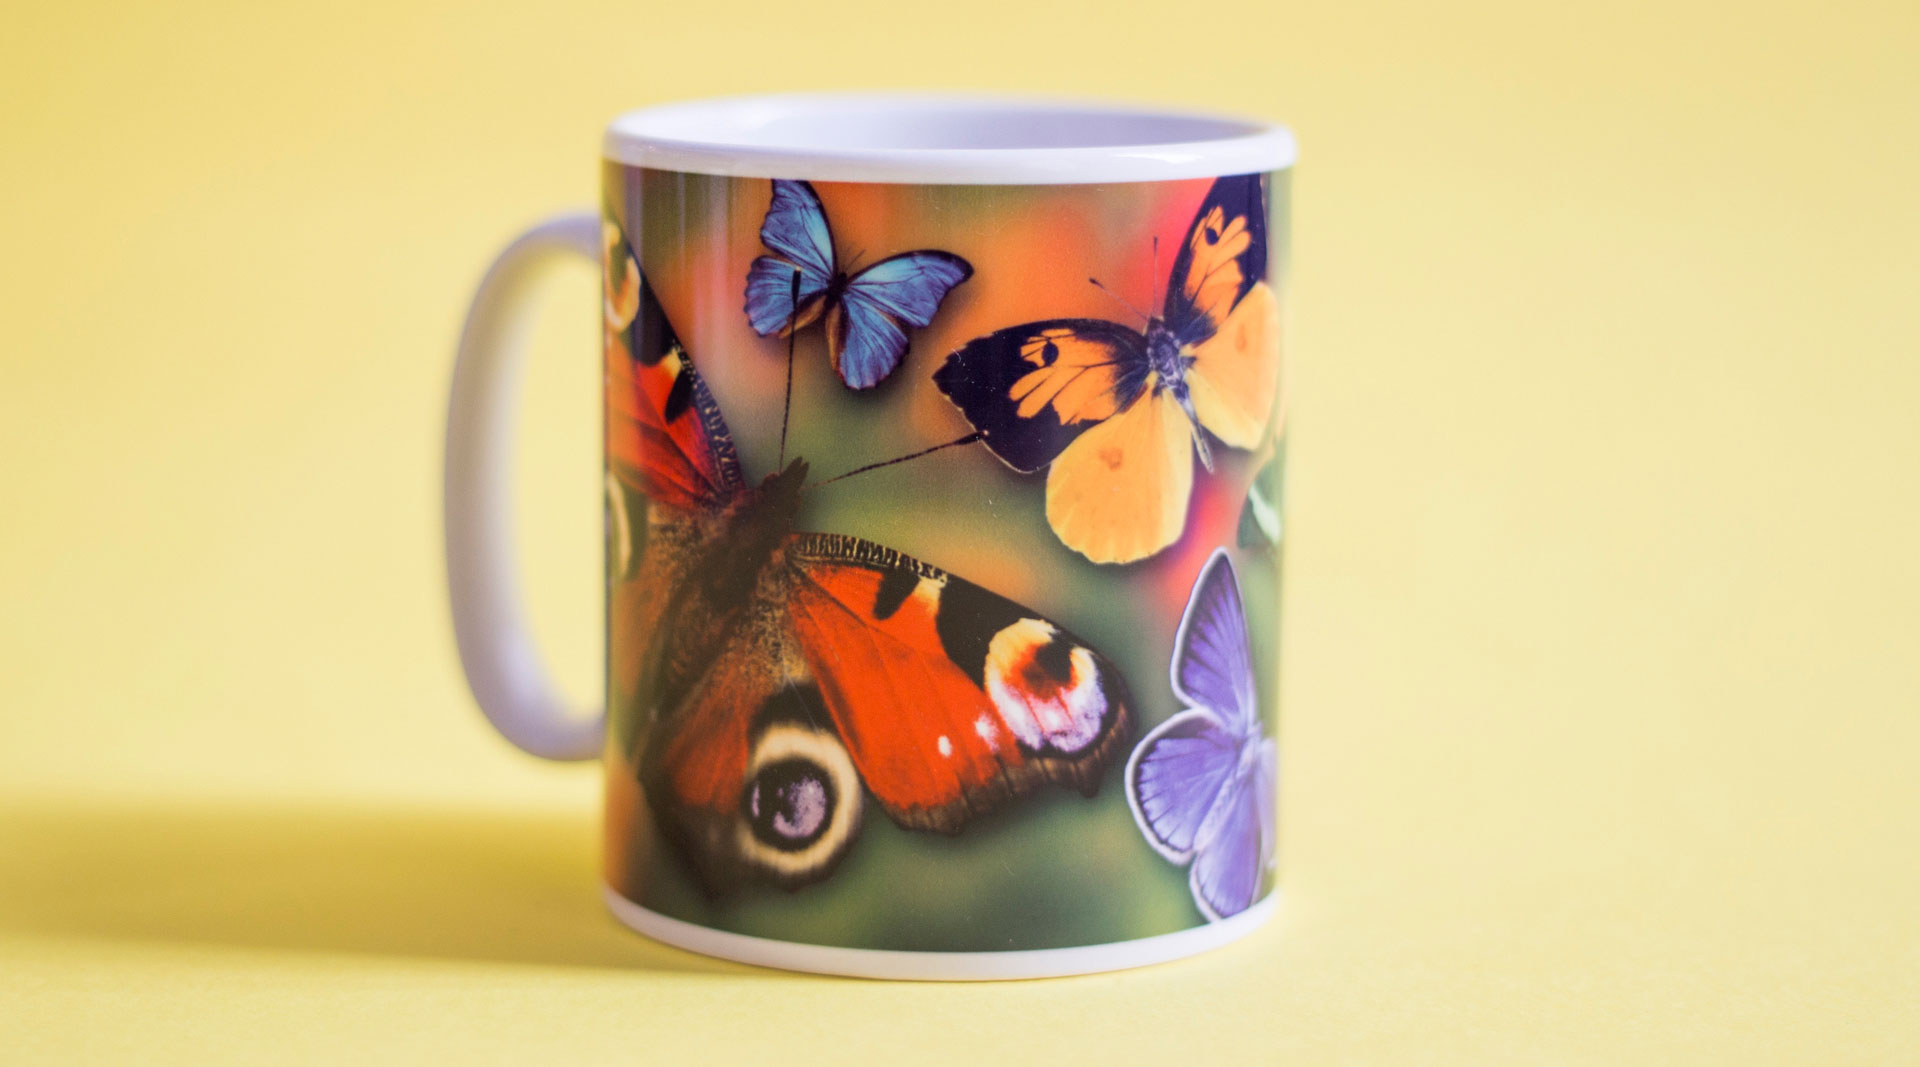 Cambridge dye-sublimation printed promotional mug from Prince William Pottery